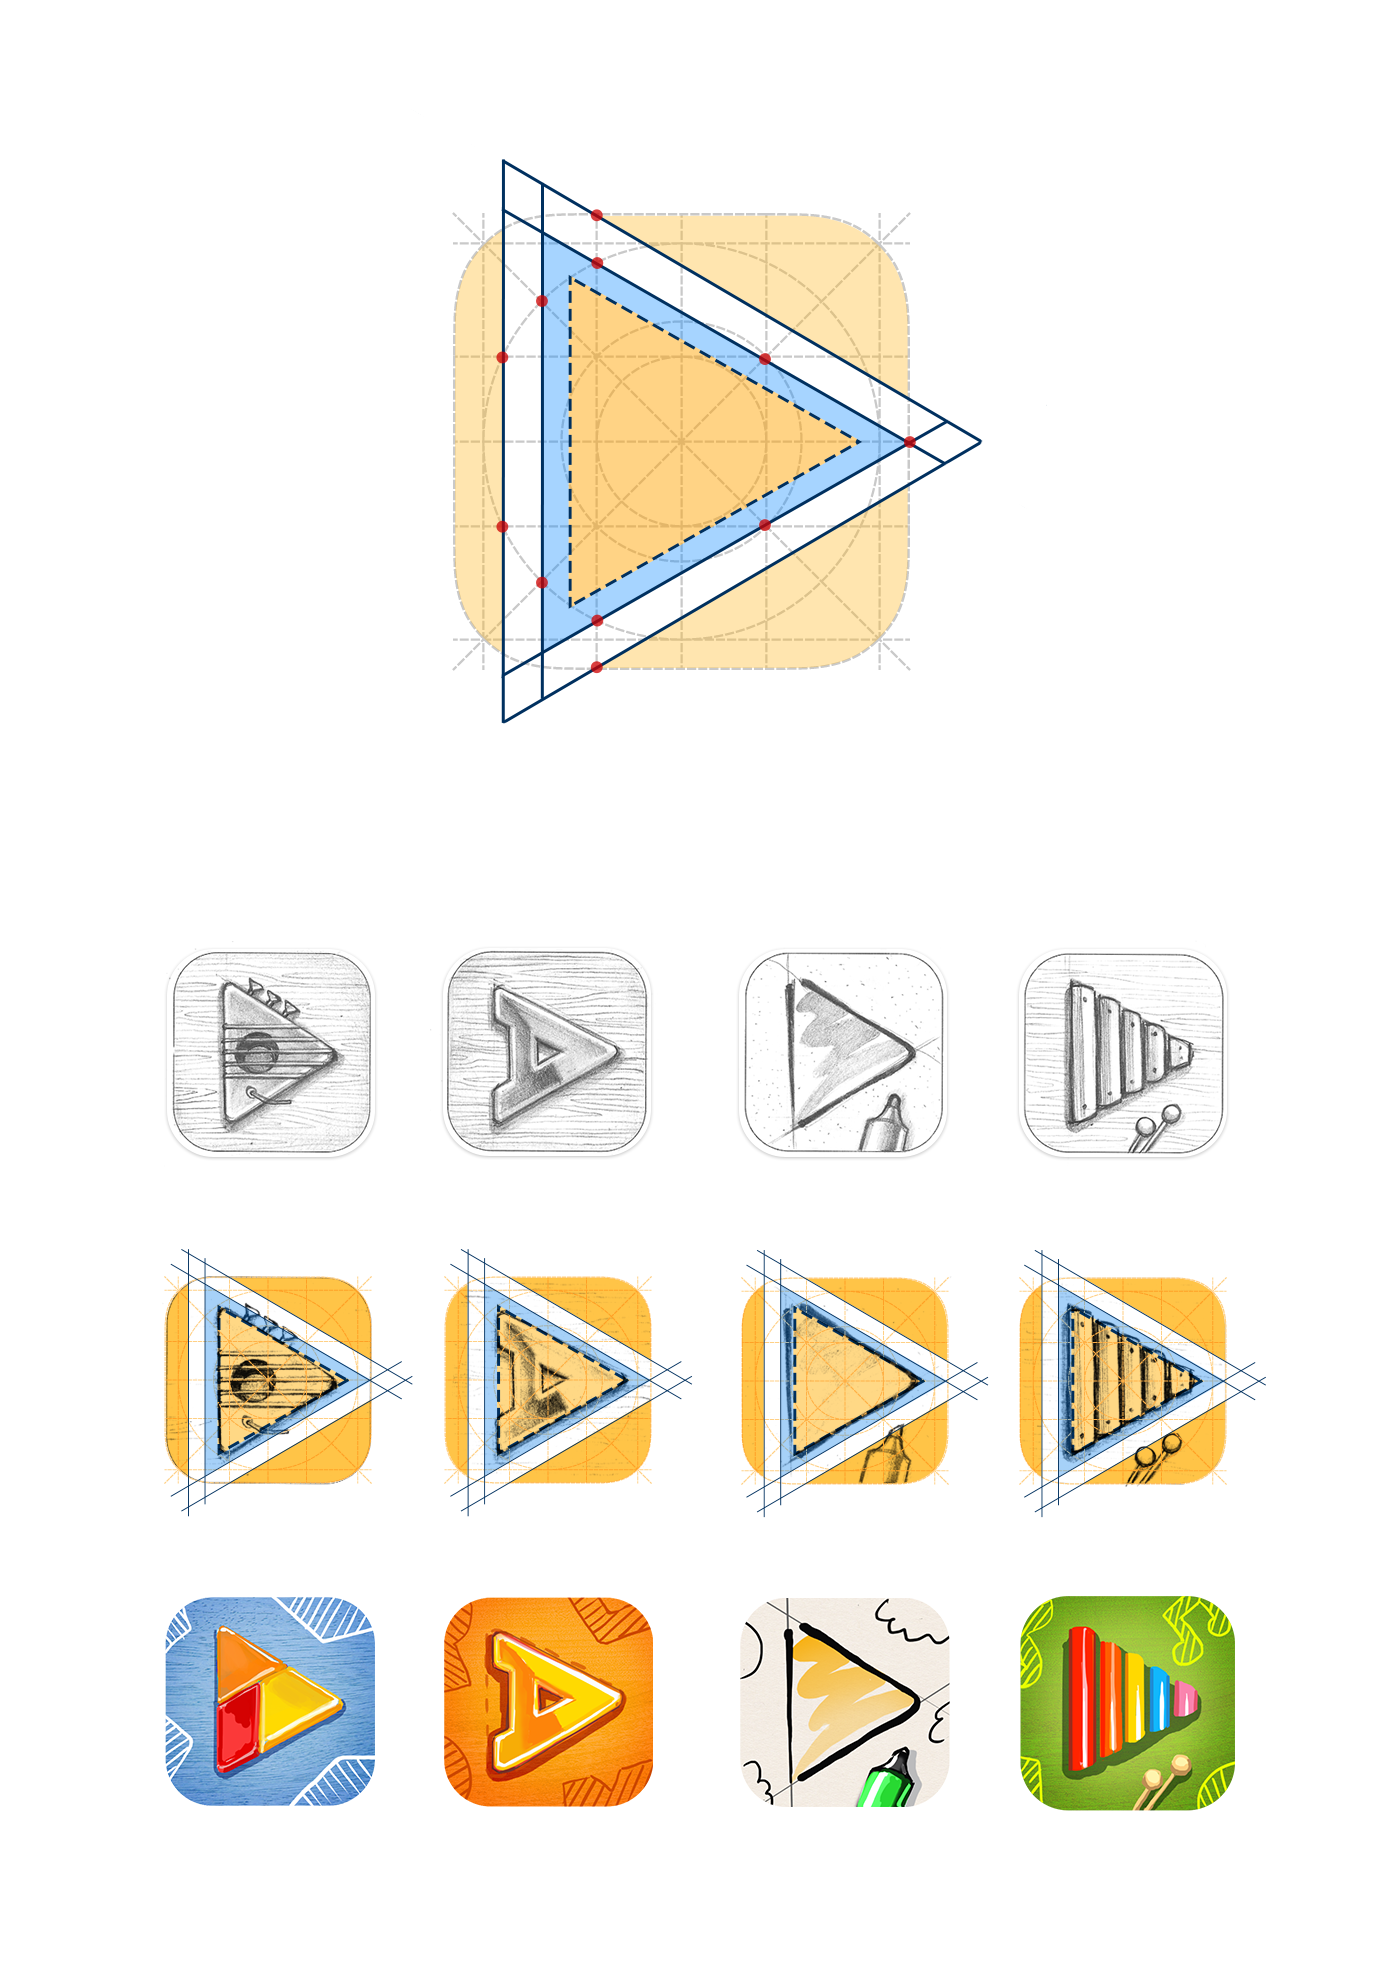 Osmo app icons iphone children words design system guidelines visual identity